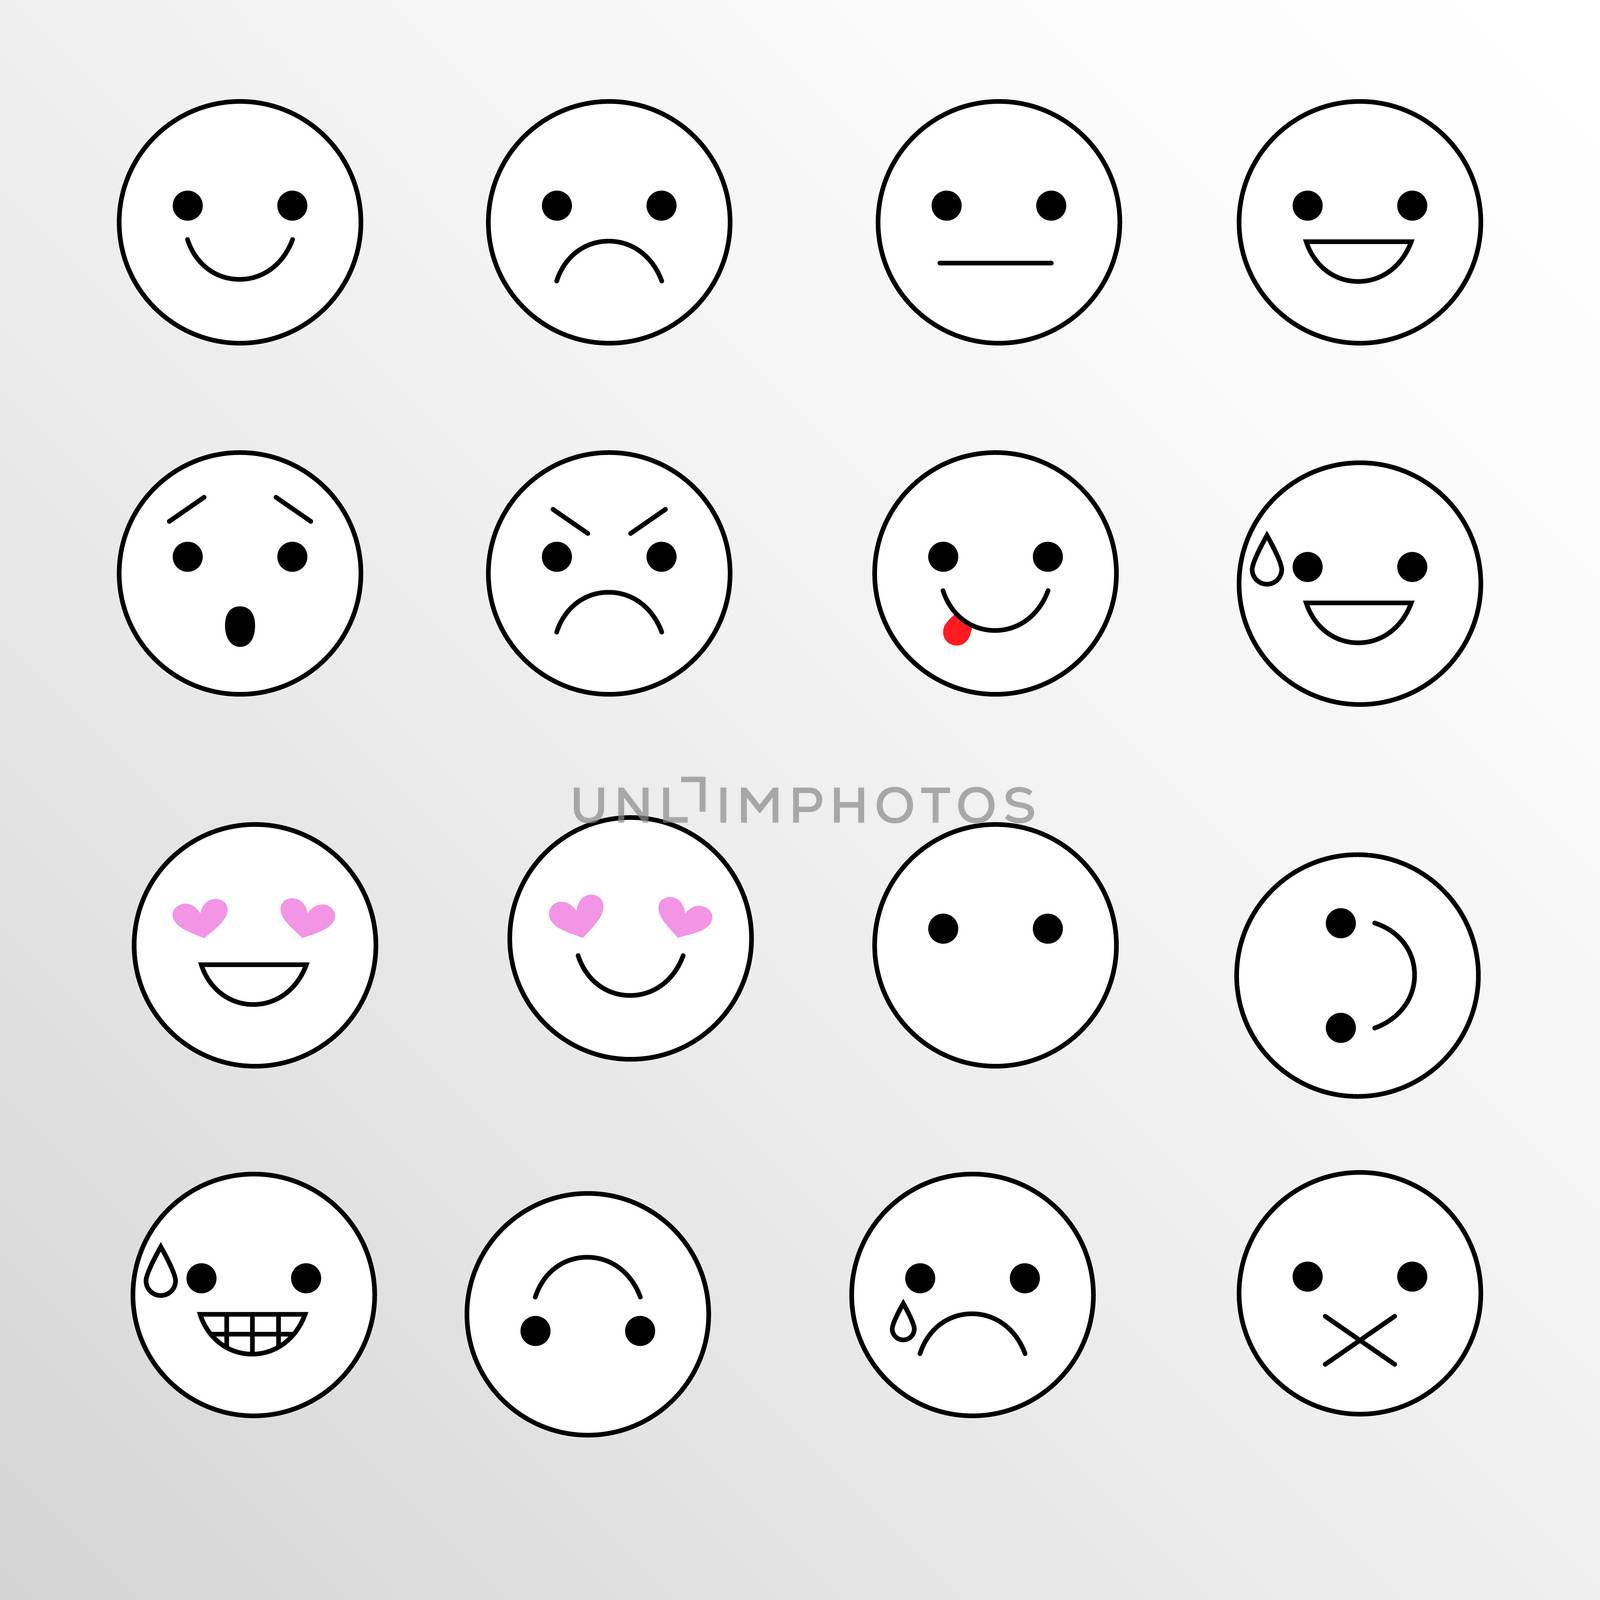 Set emotions icons for applications and chat. Emoticons with different emotions isolated on white background. by Elena_Garder